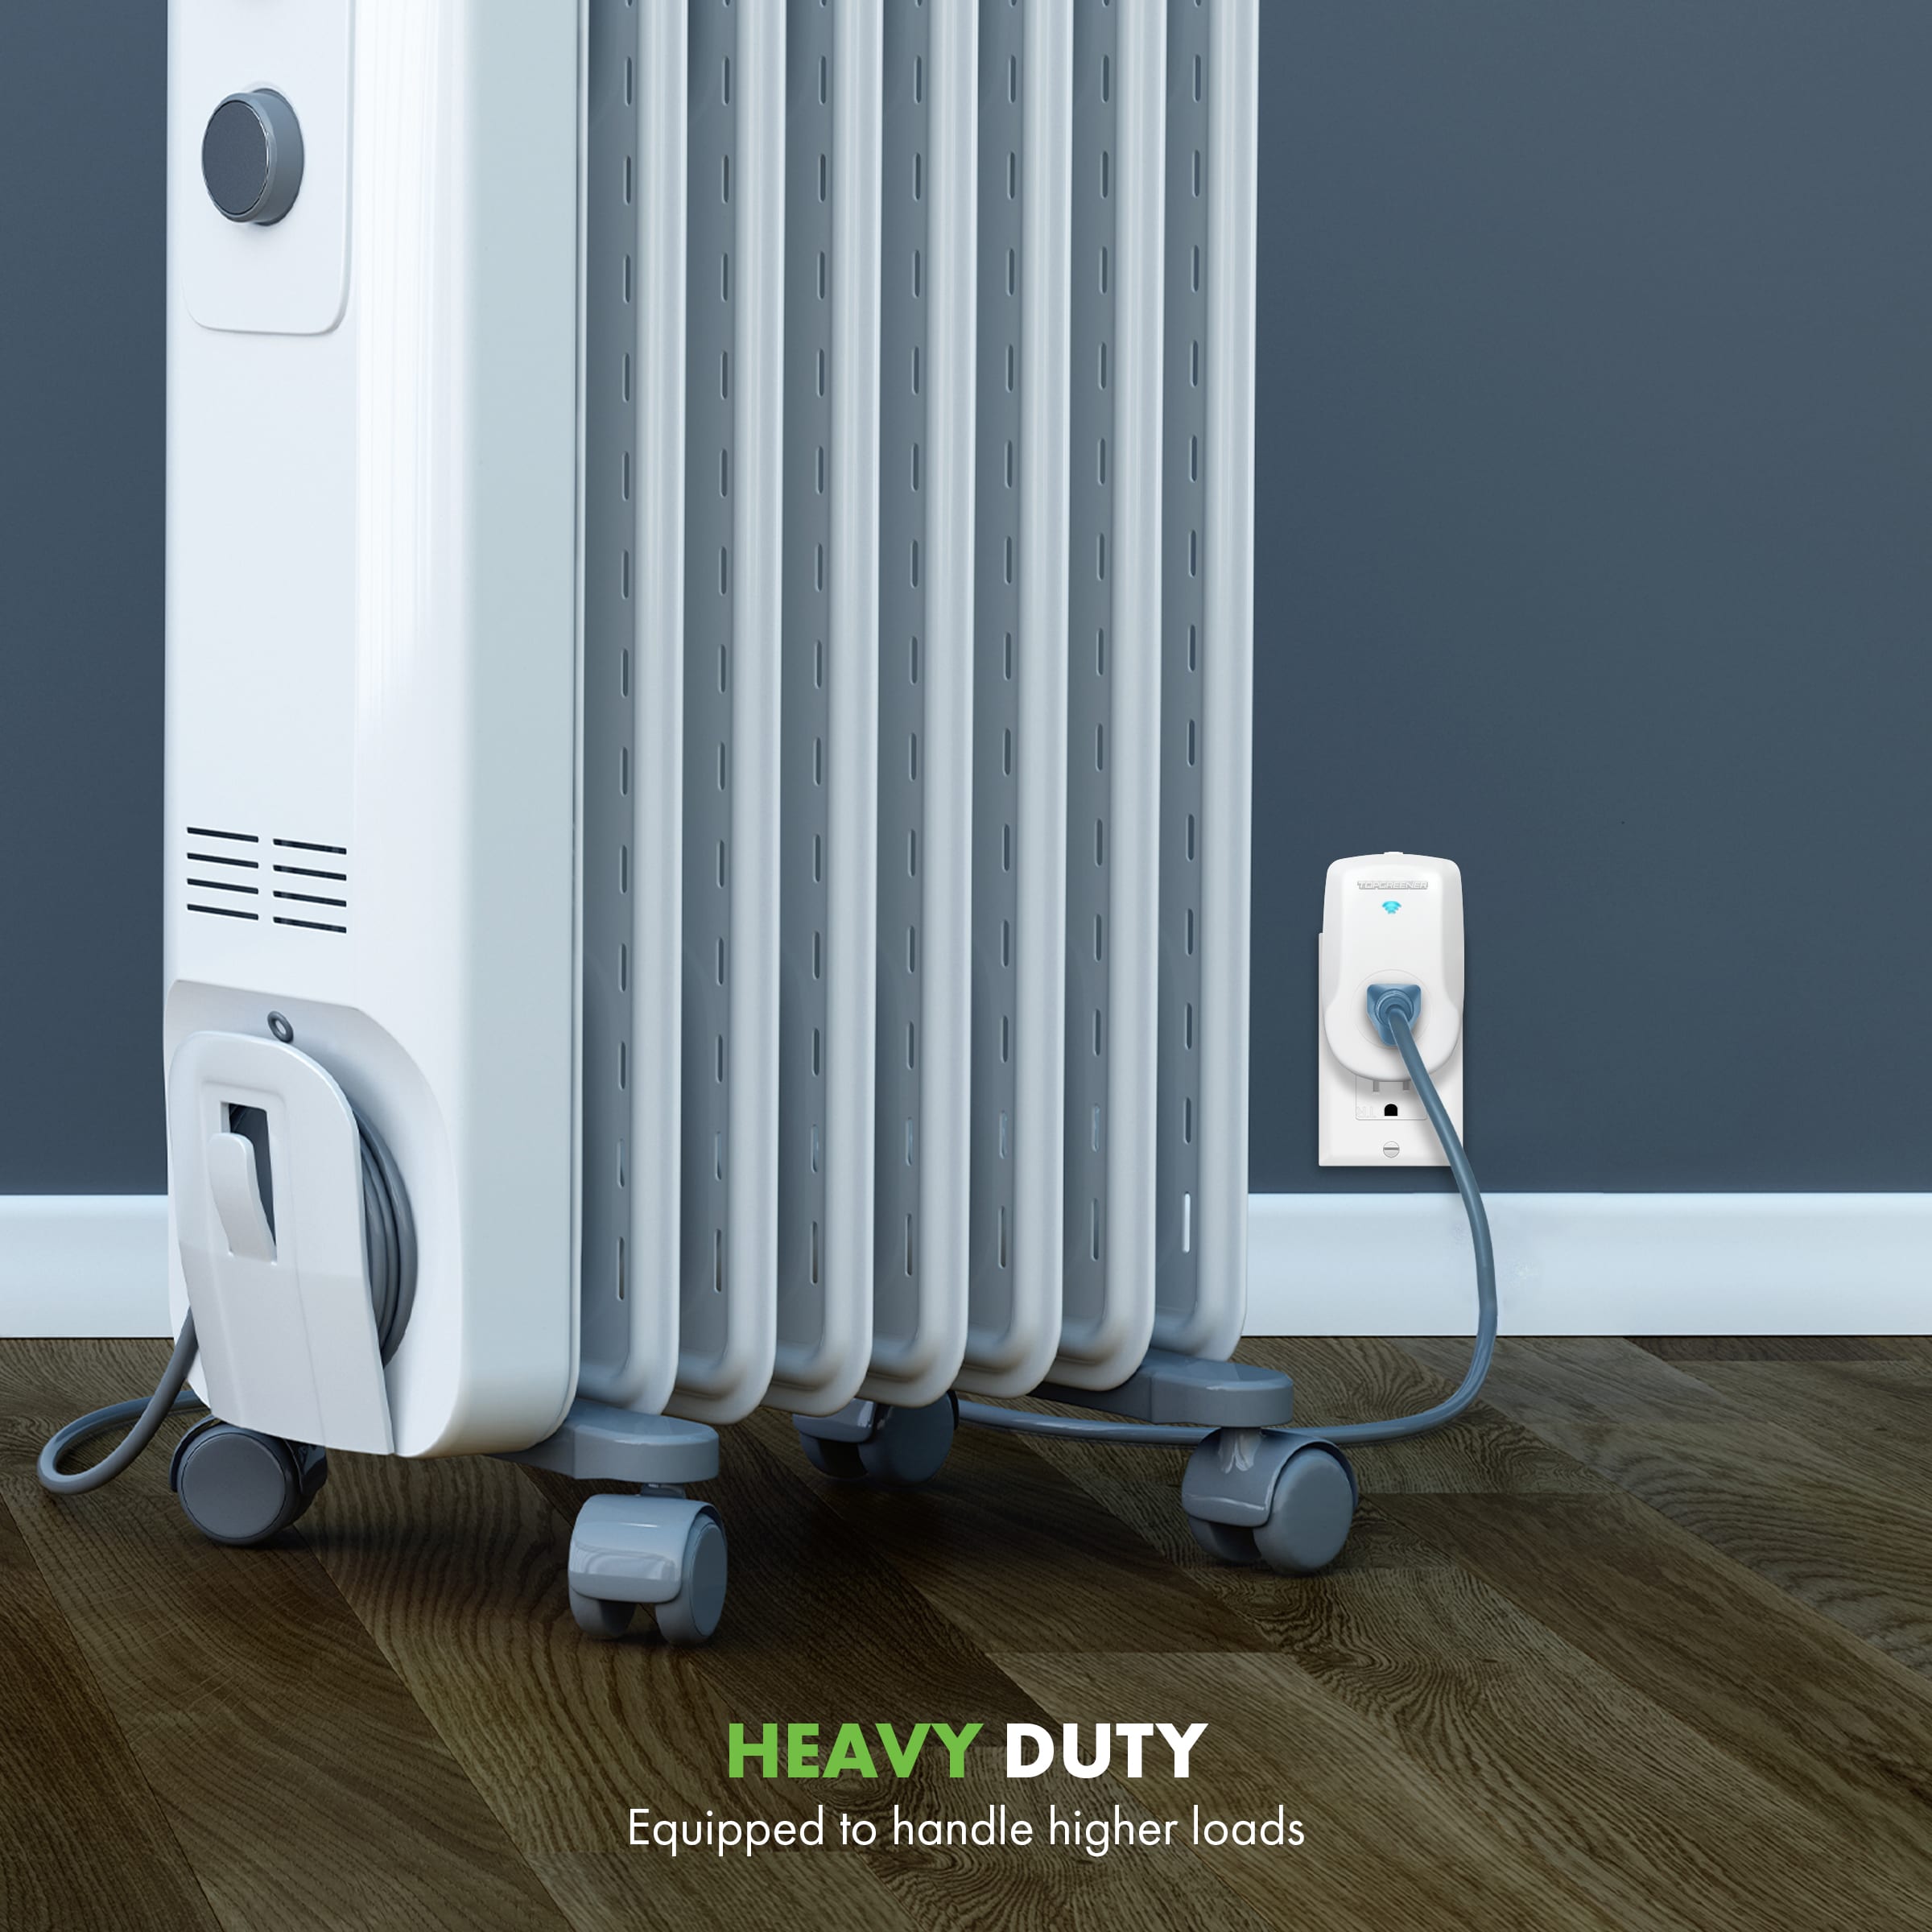 Heavy-Duty Smart Wi-Fi Plug-in (15A) with Energy Monitoring